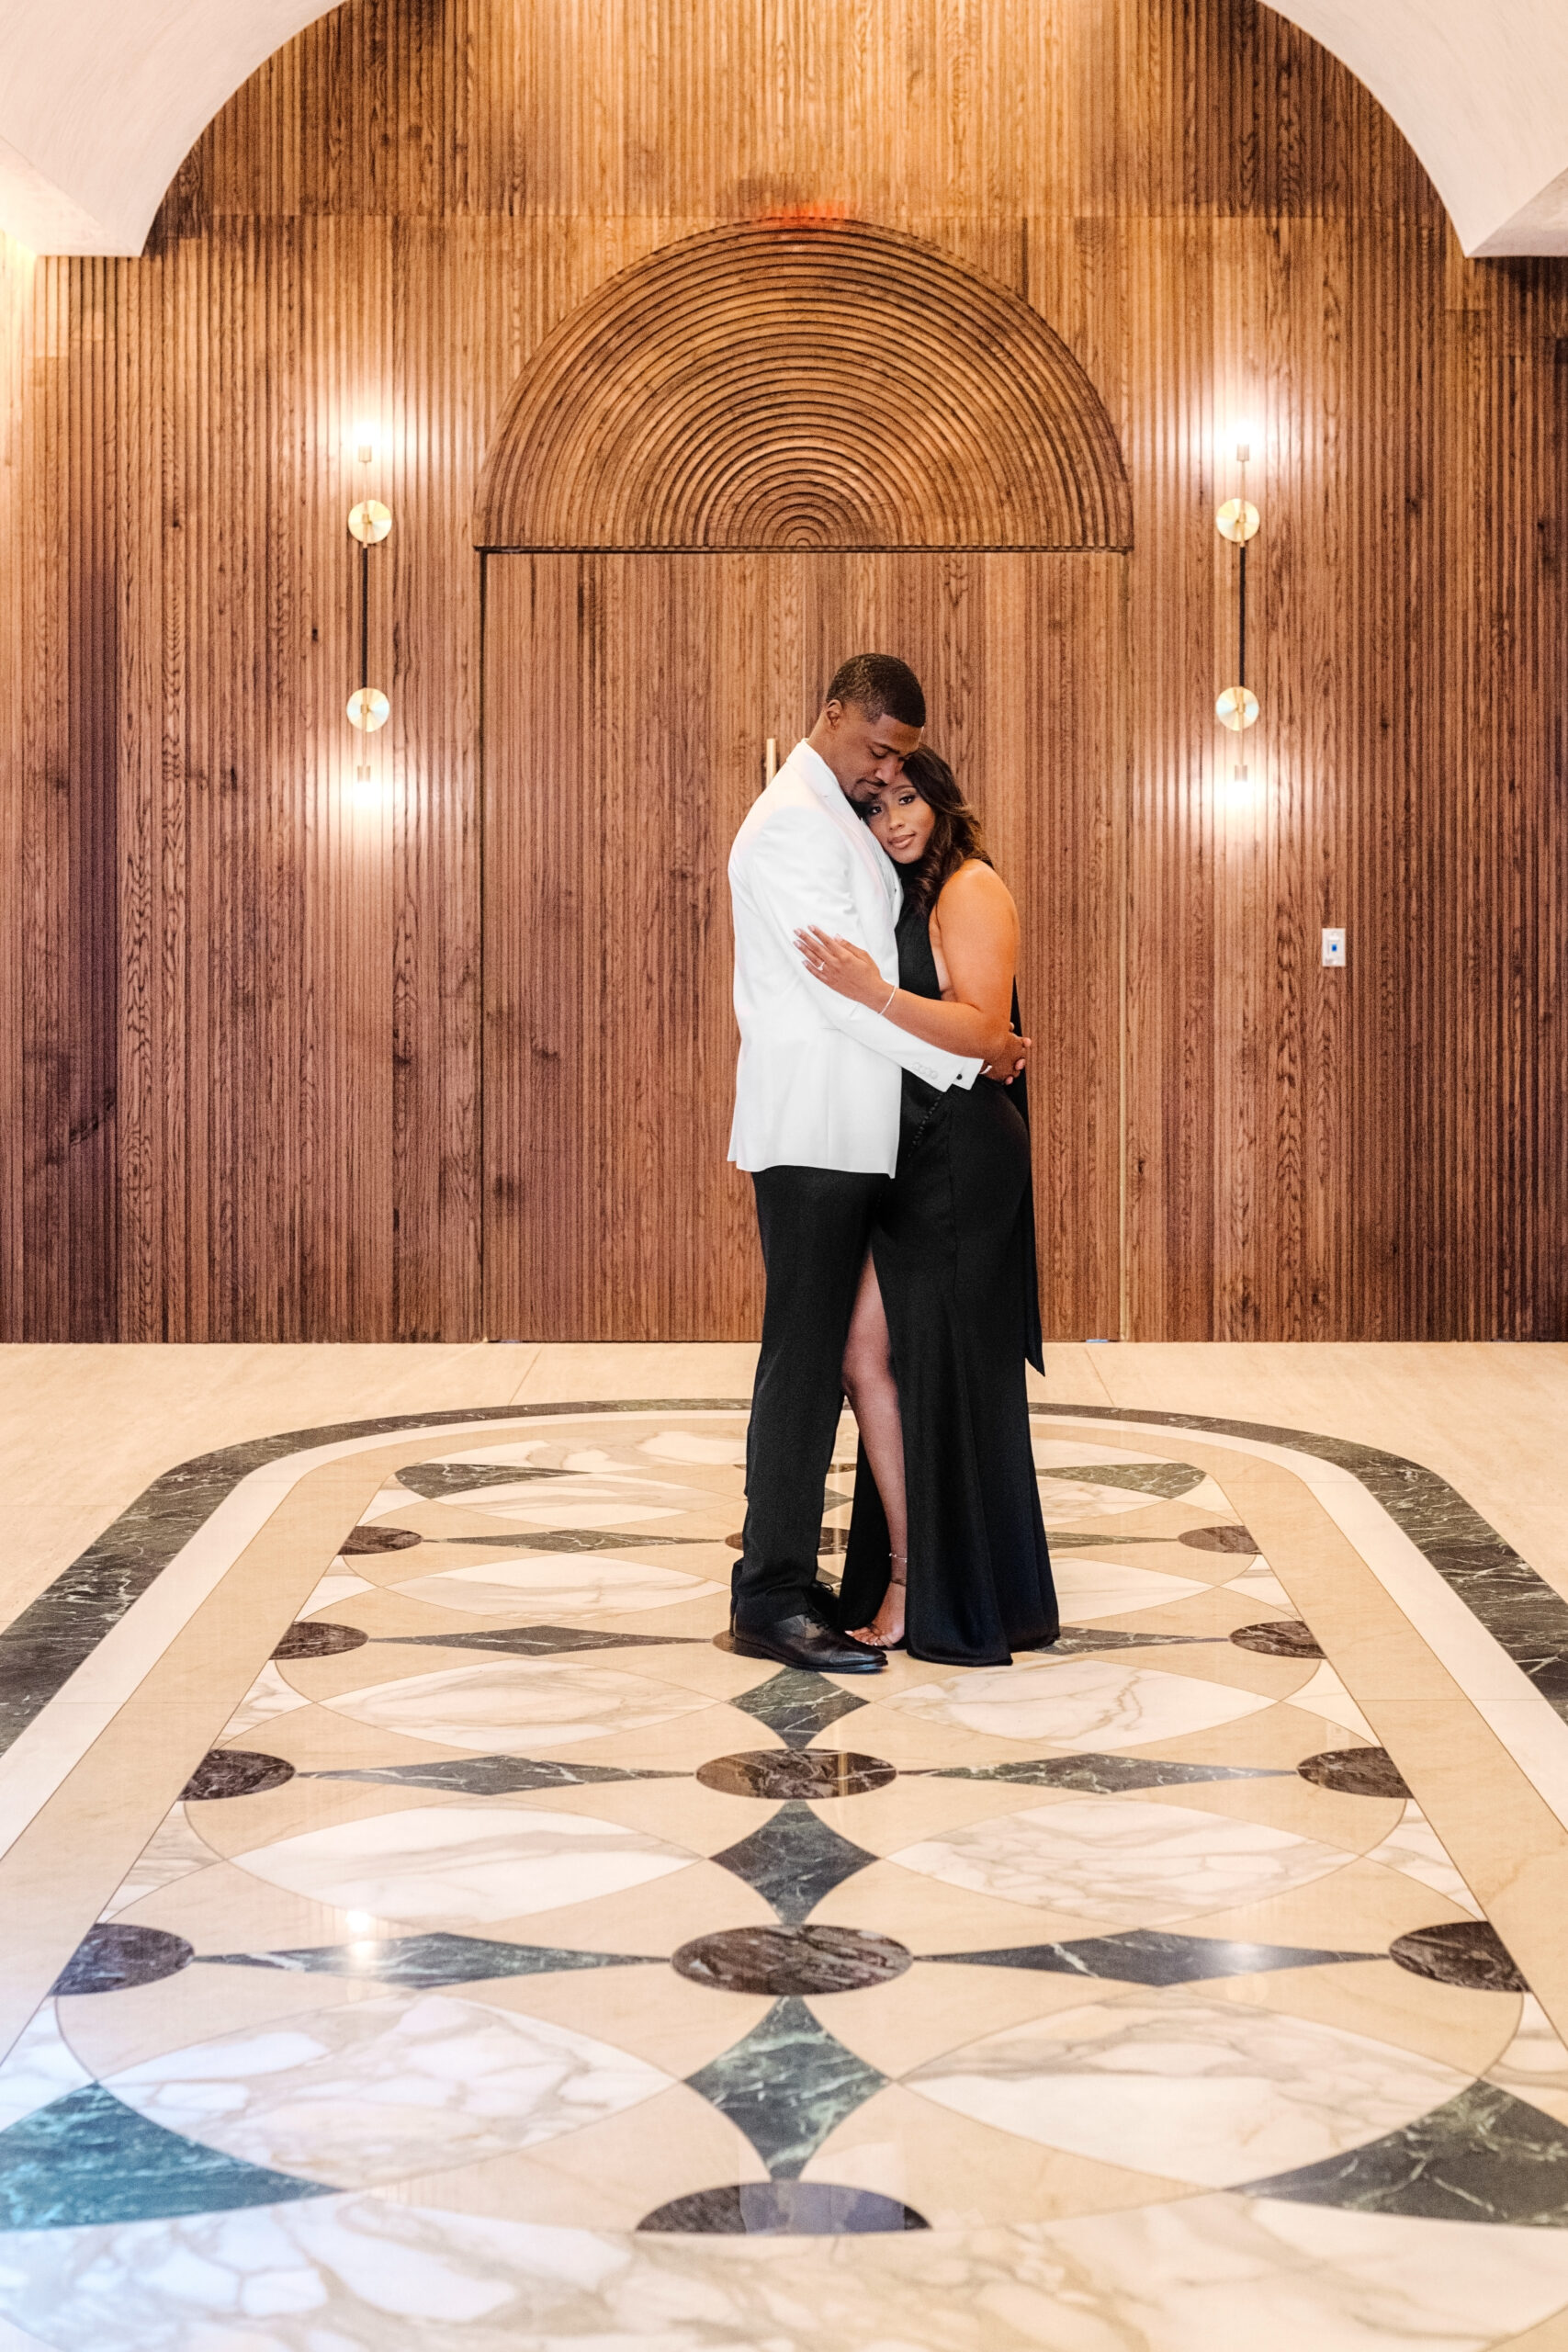 Thompson Hotel Houston is a favorite backdrop to any wedding